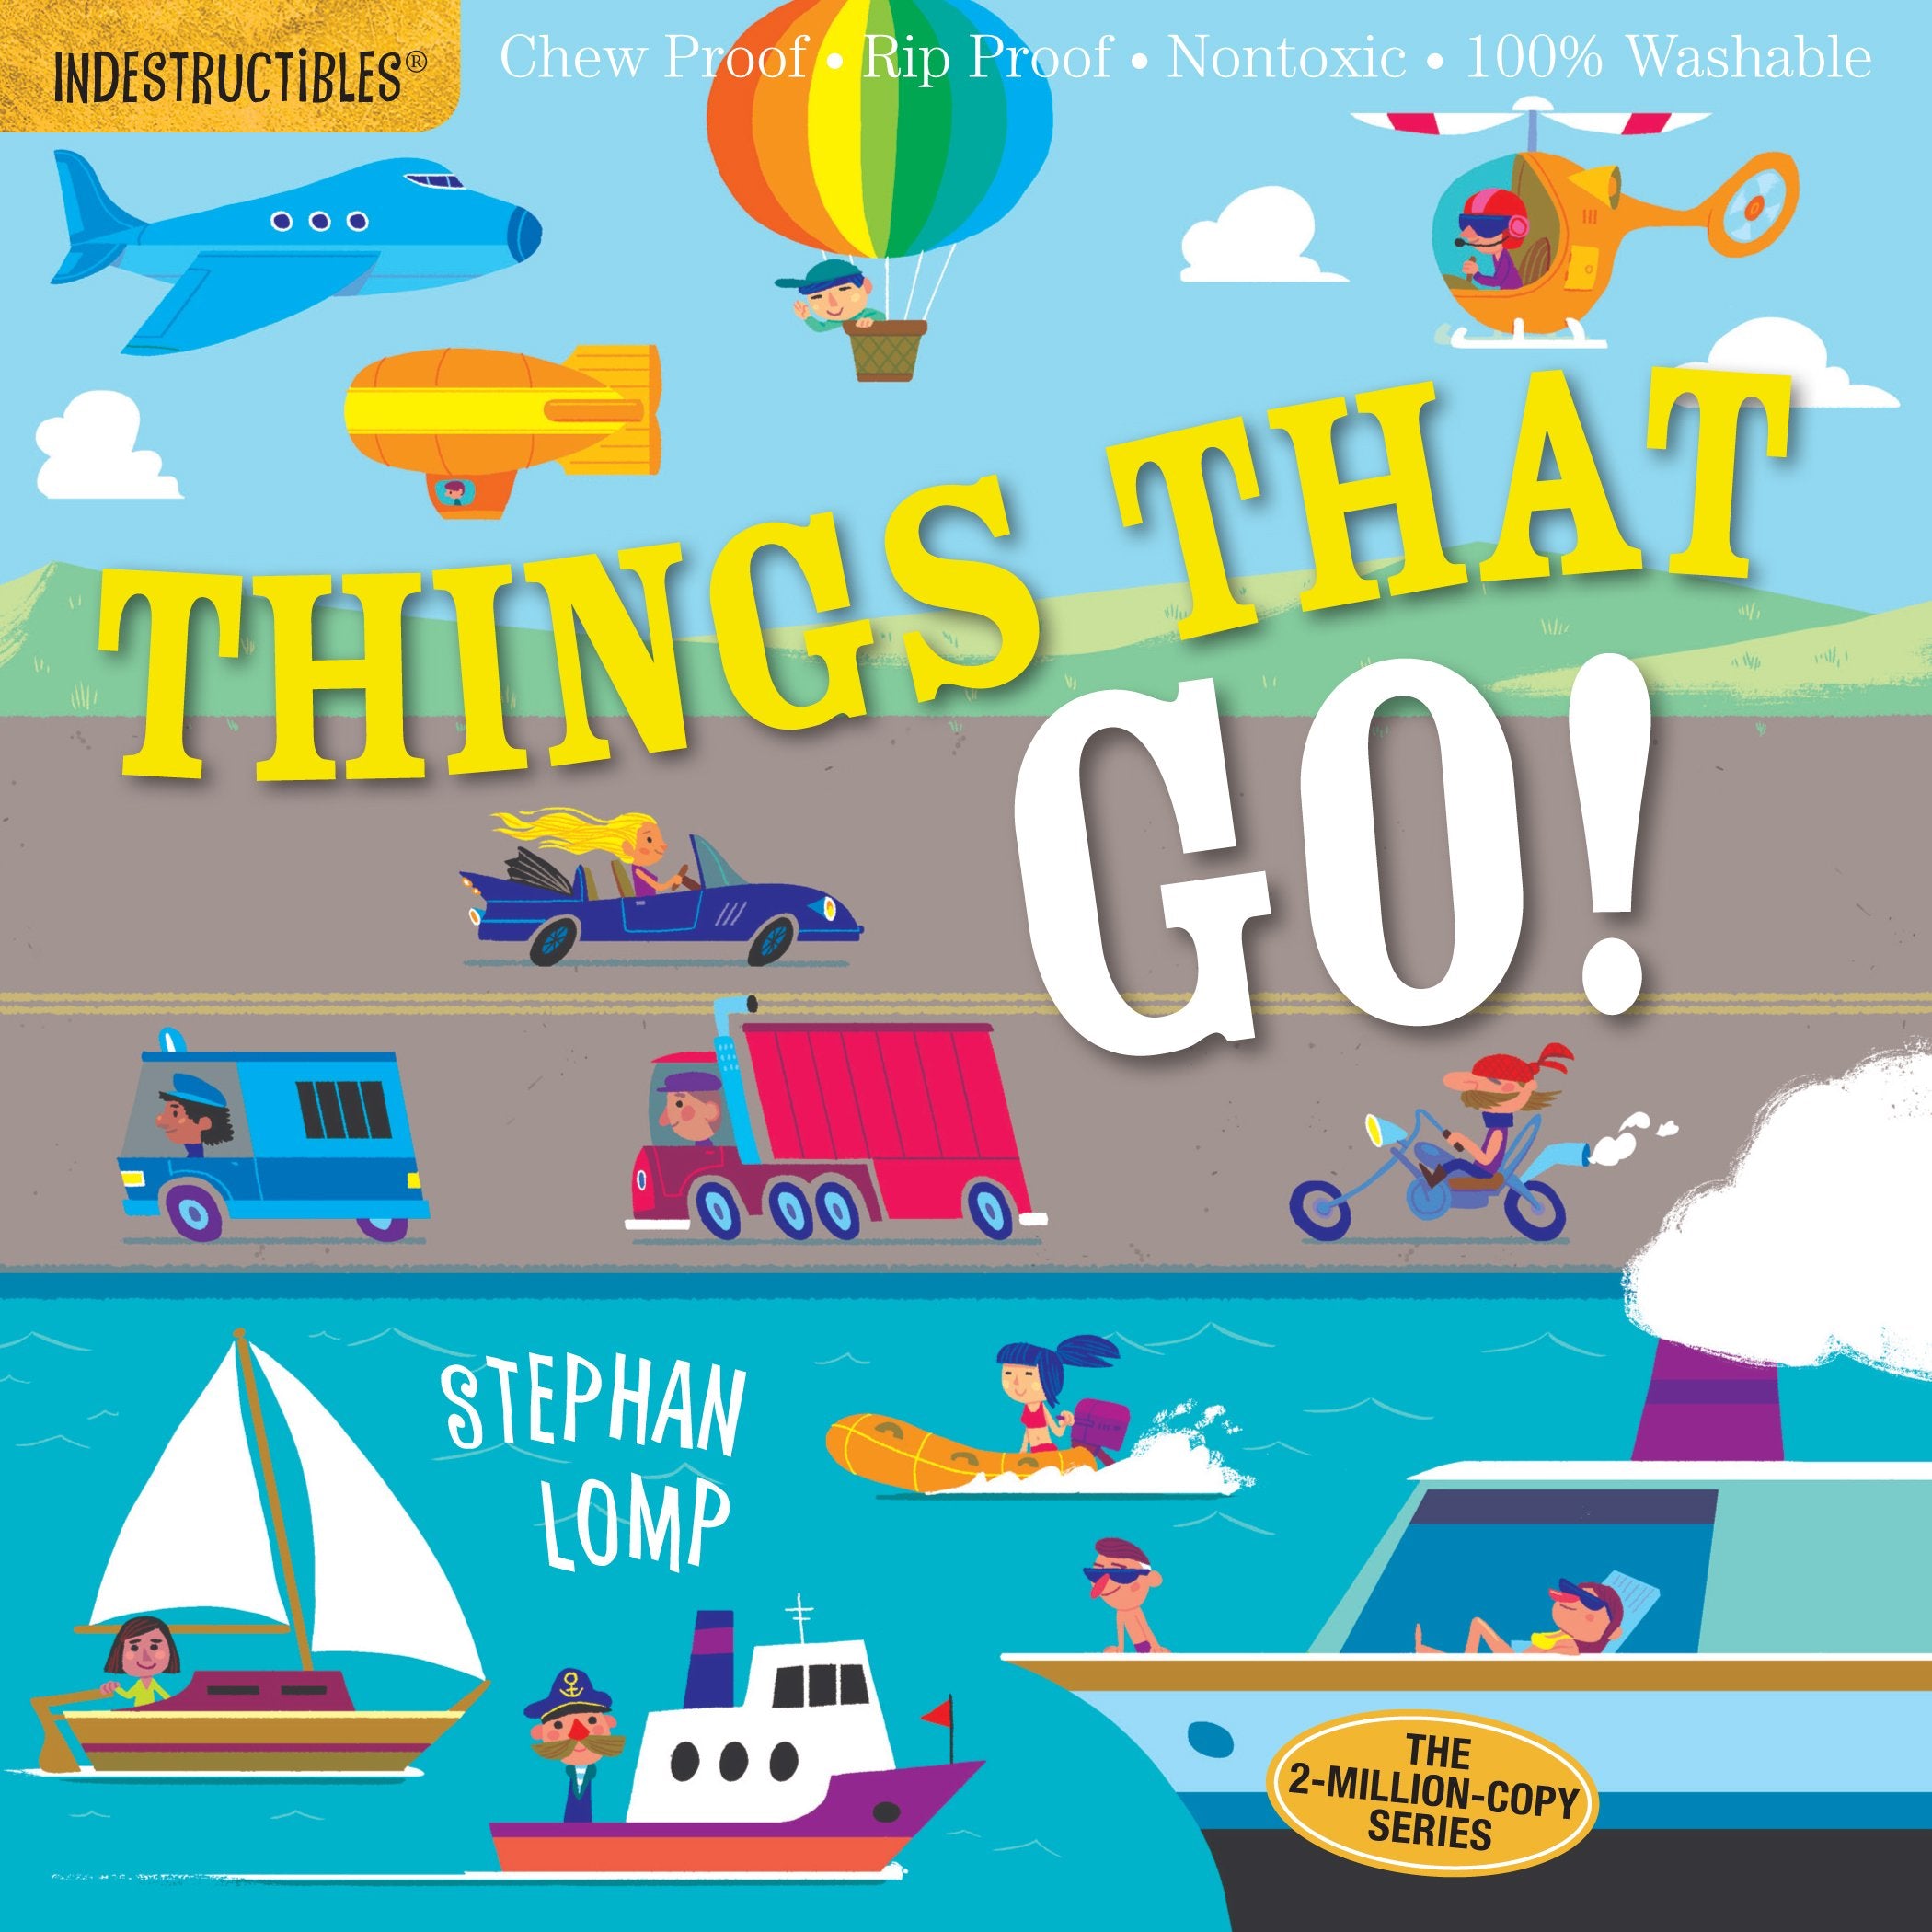 Indestructibles Book - Things that go